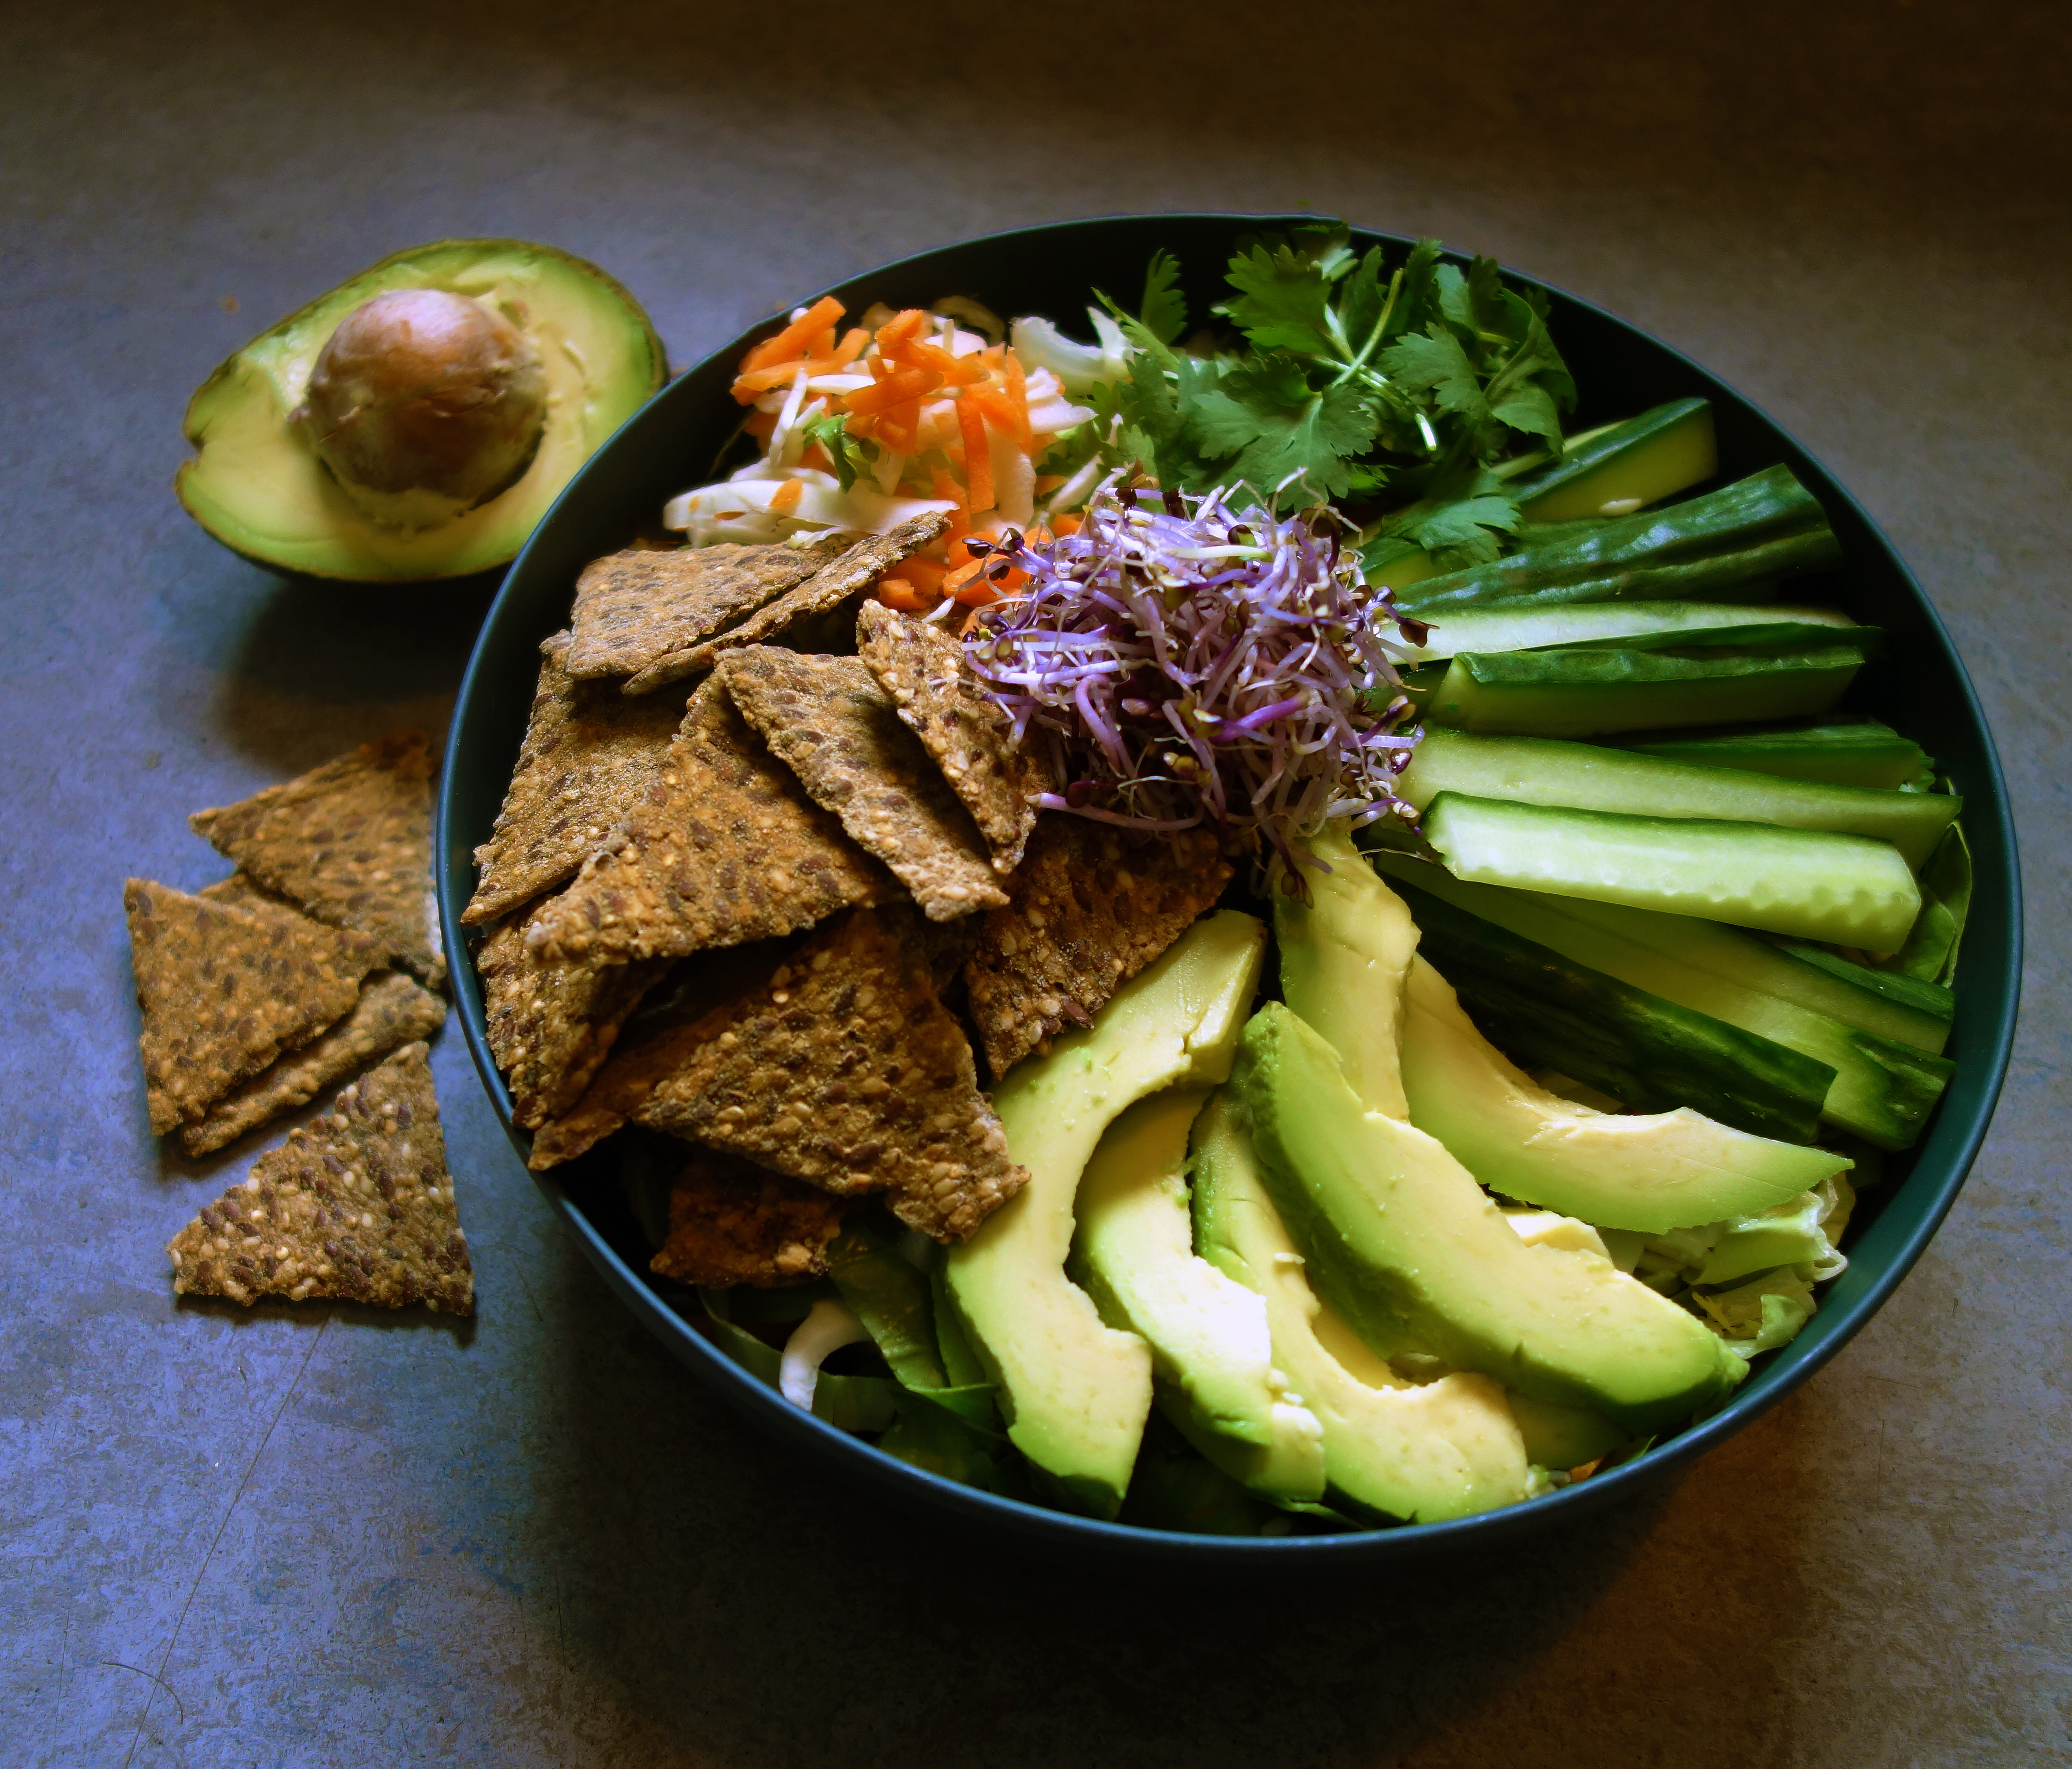 Salad bowl with avocado and a ginger lime dressing